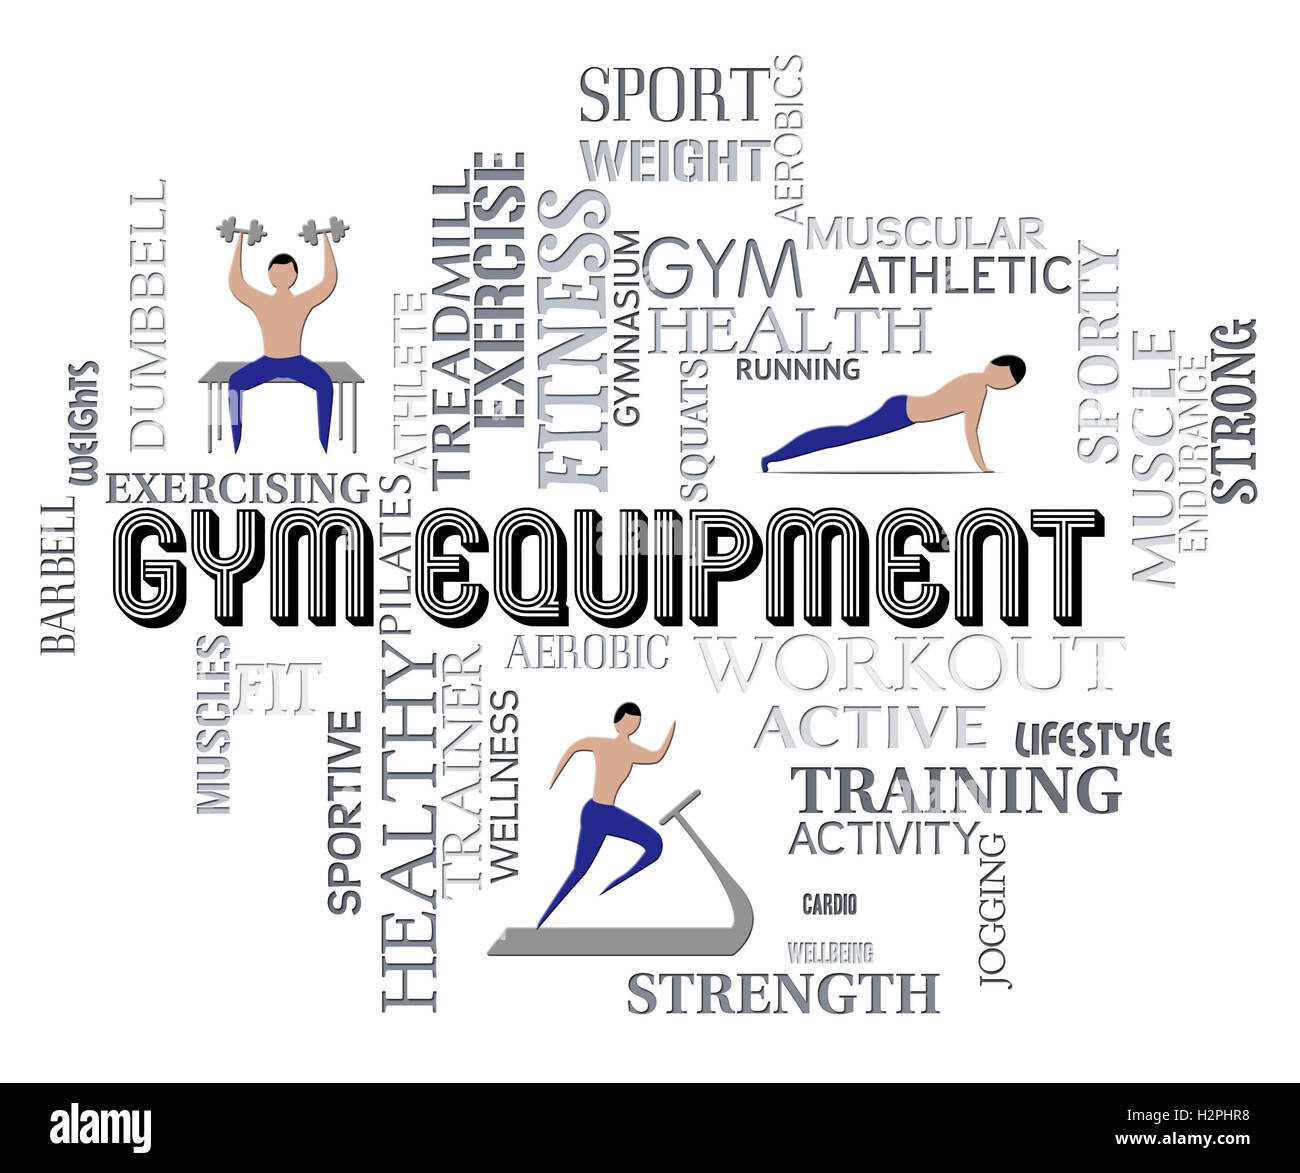 Gym Equipment Meaning Working Out And Exercising Gear Stock Photo - Alamy